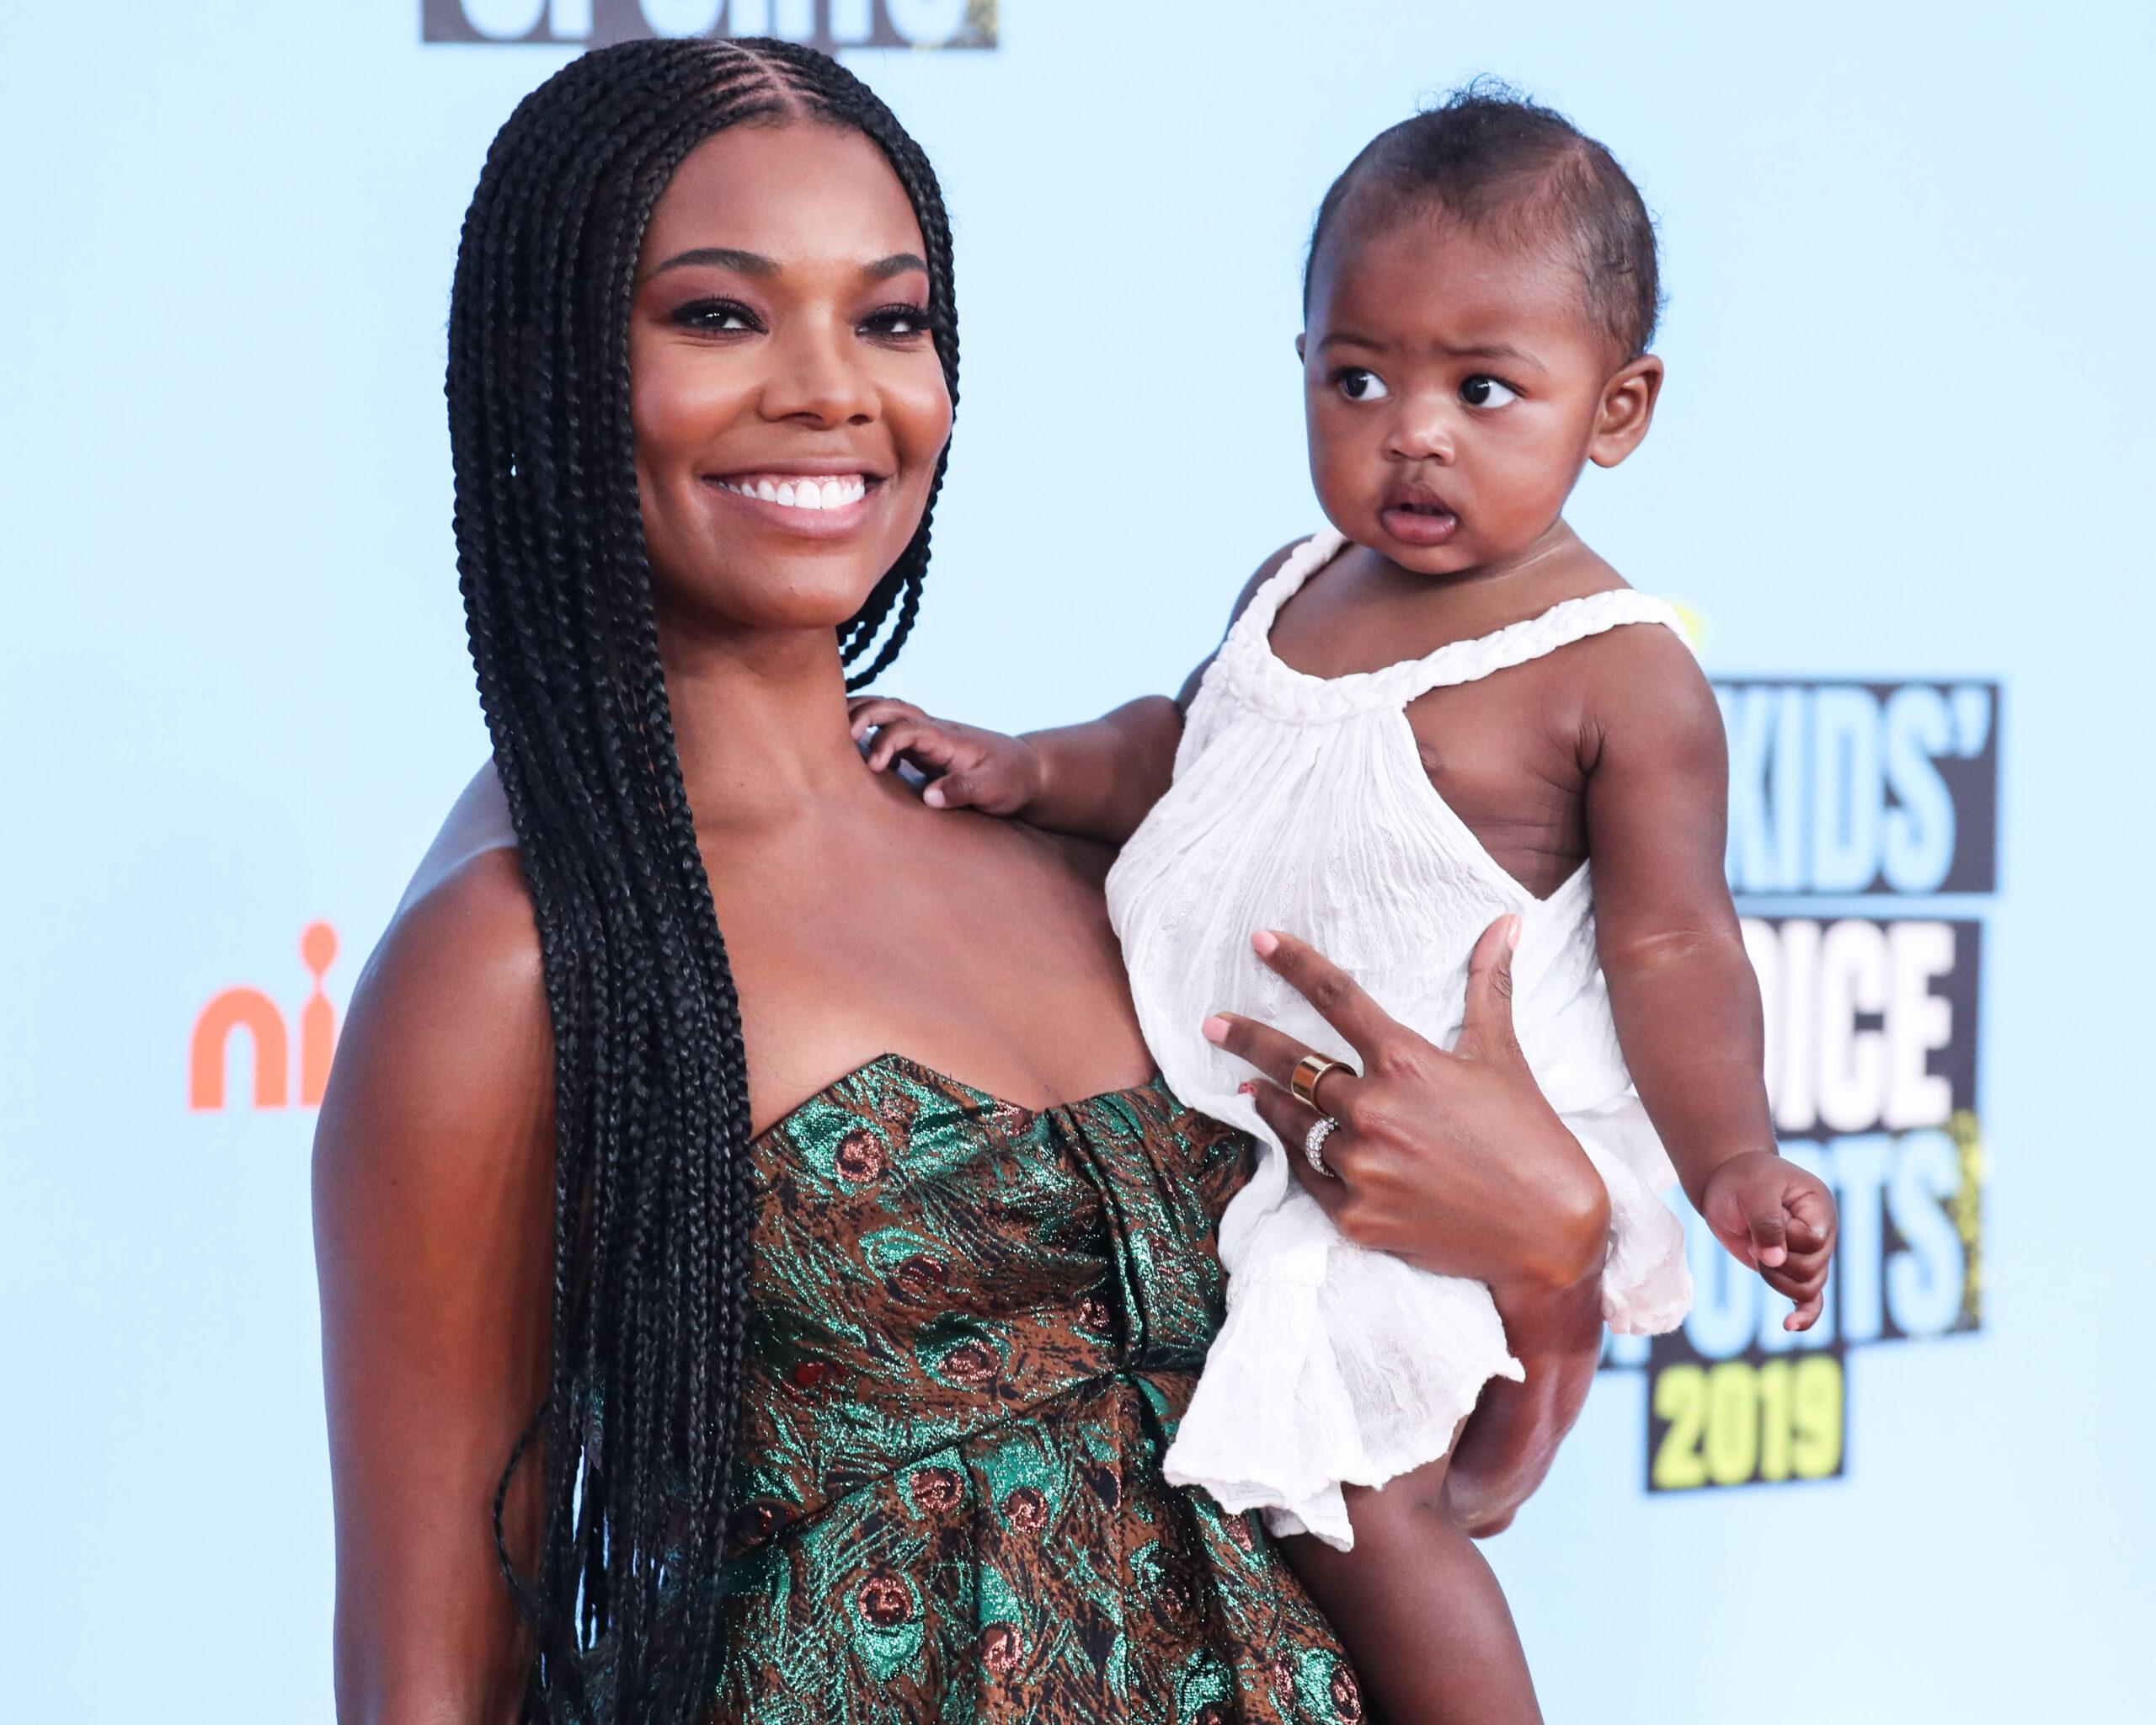 Gabrielle Union & daughter Kaavia James at Nickelodeon Kids' Choice Sports 2019